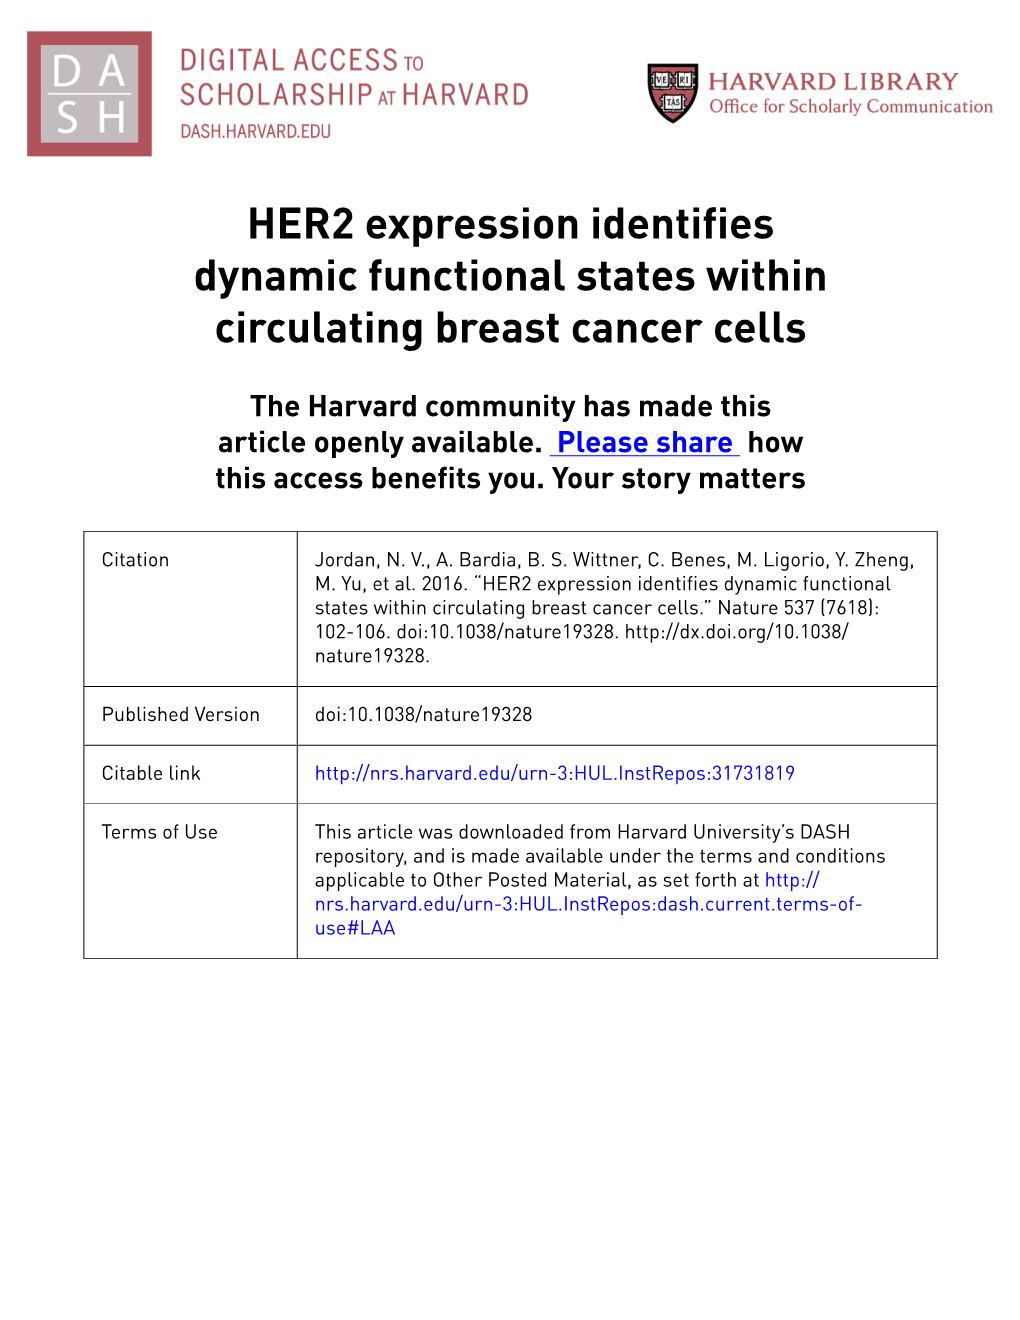 HER2 Expression Identifies Dynamic Functional States Within Circulating Breast Cancer Cells